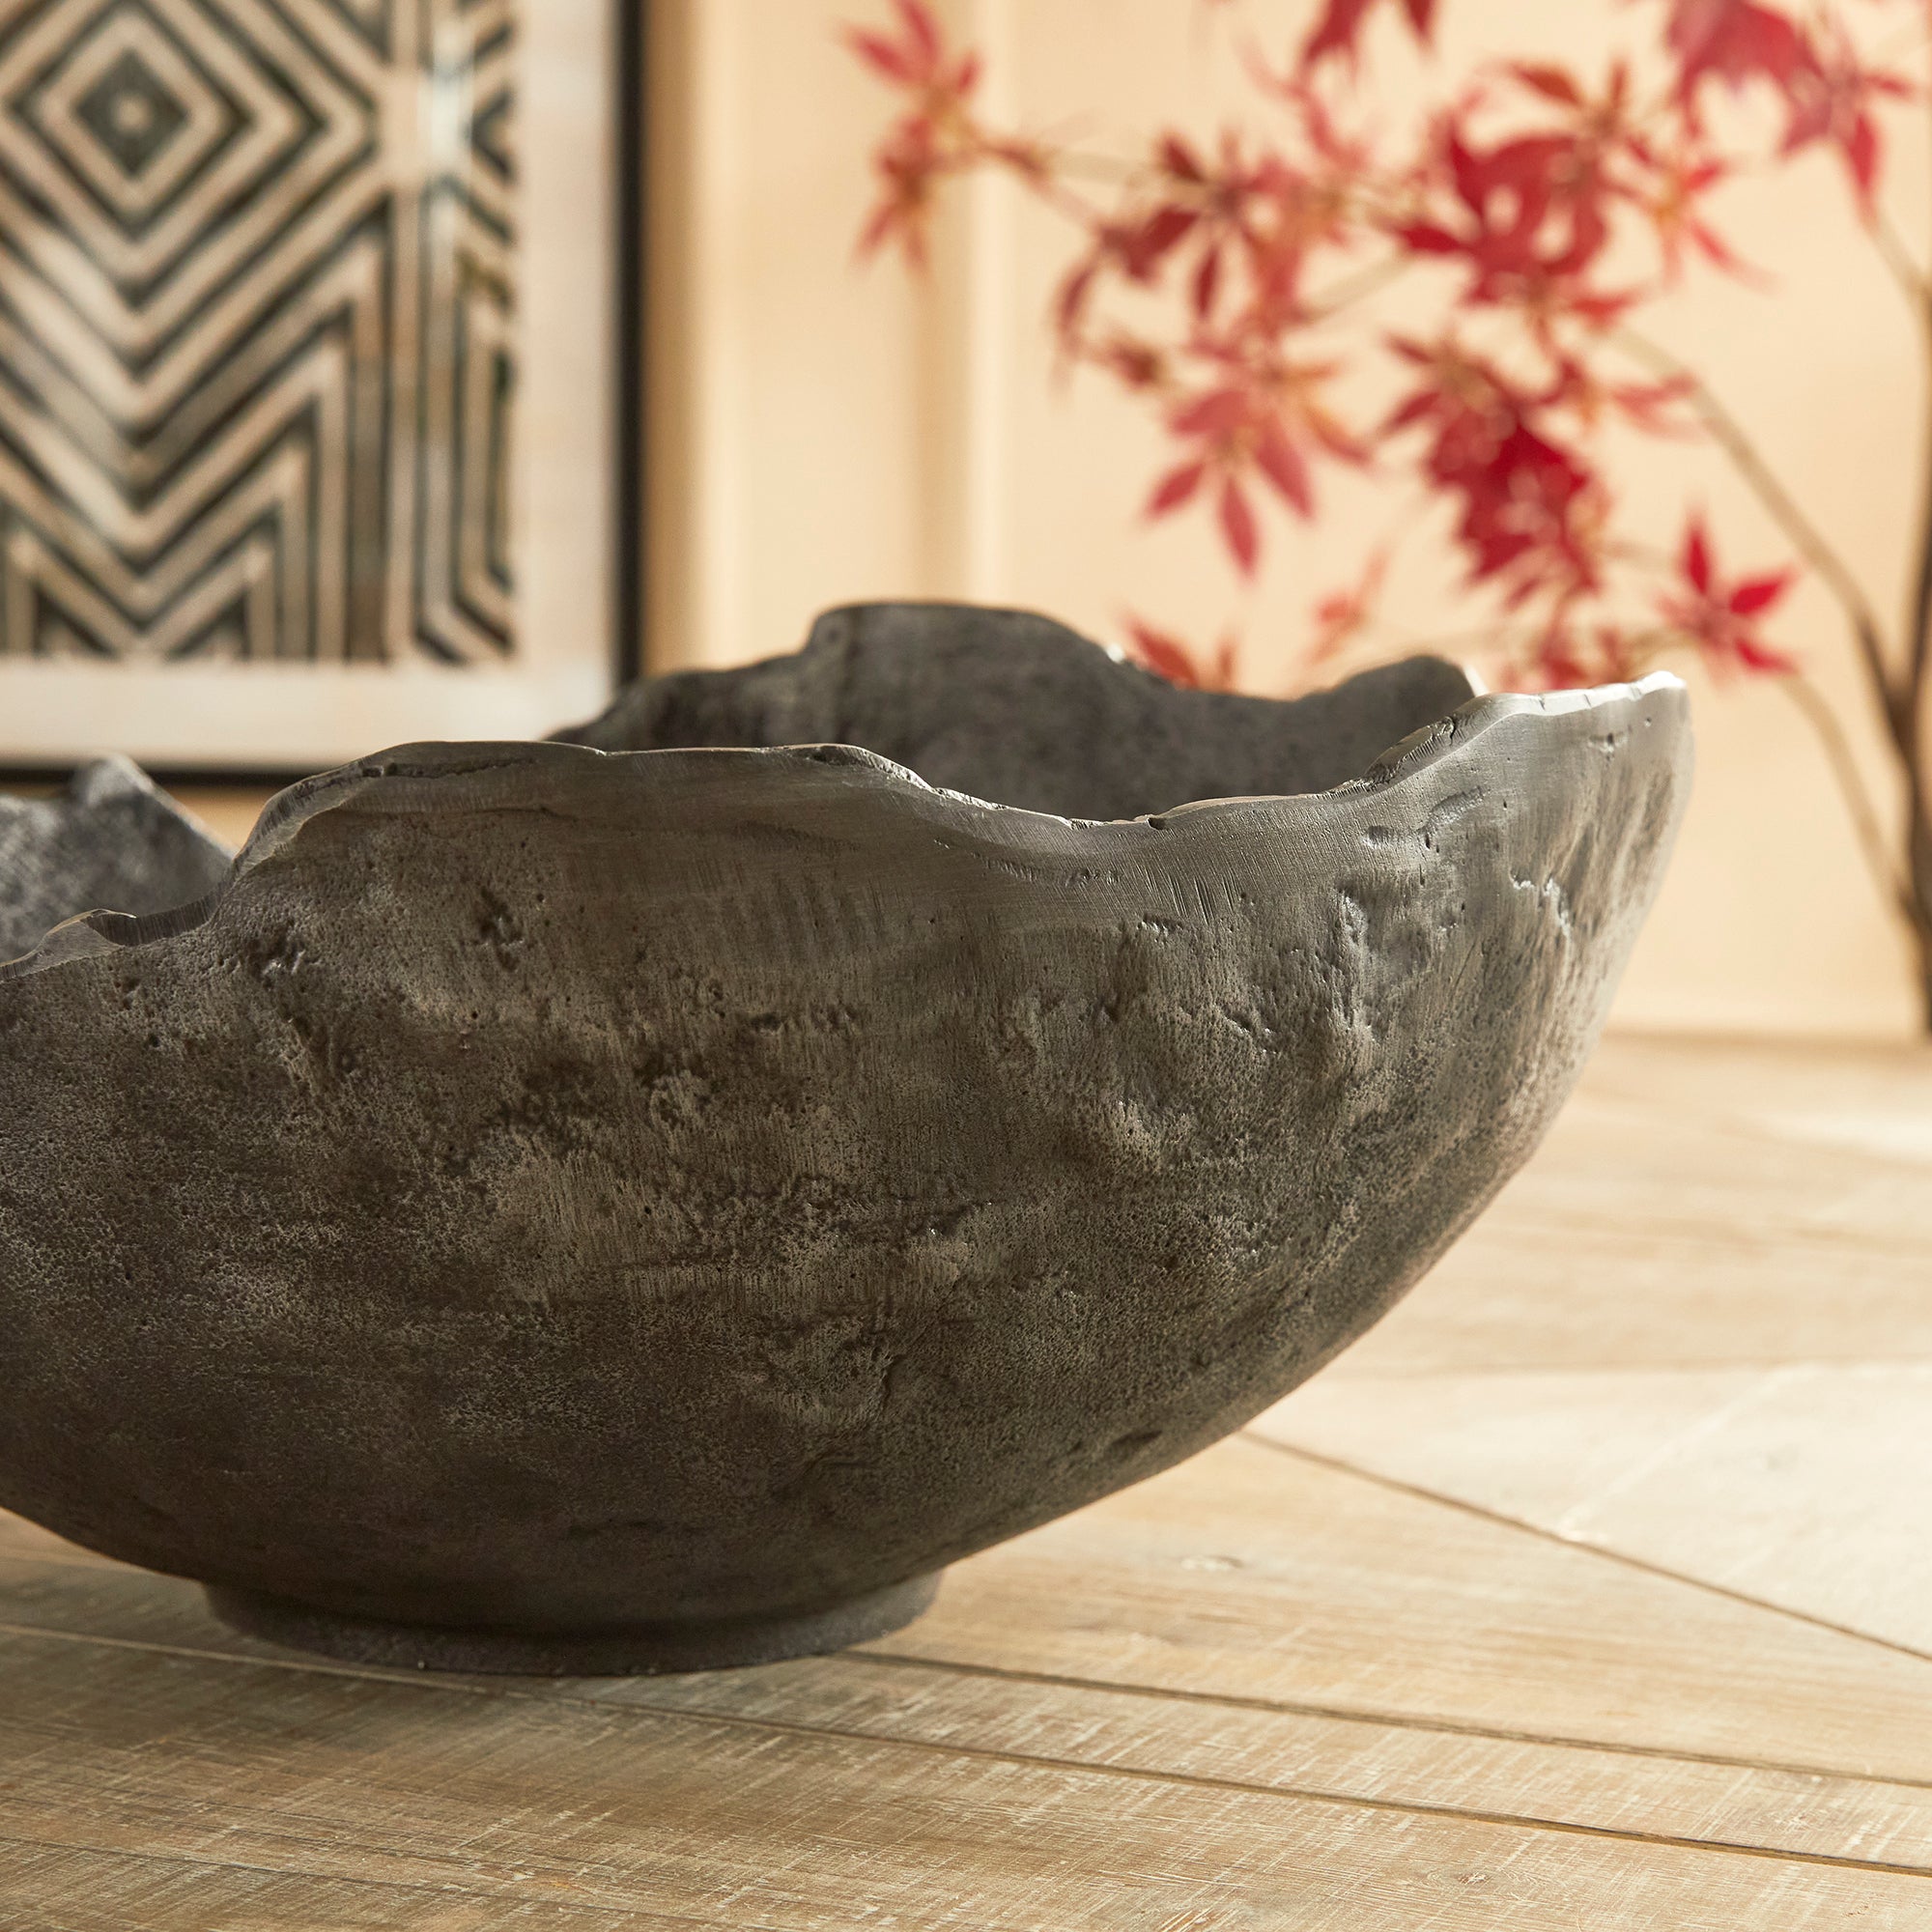 This decorative hand-sculpted bowl is made to be on display. With an oil-rubbed bronze finish and irregular edge, styled or just as it is, a strong statement for the modern space. The epitome of functional art. Amethyst Home provides interior design, new construction, custom furniture, and area rugs in the Los Angeles metro area.